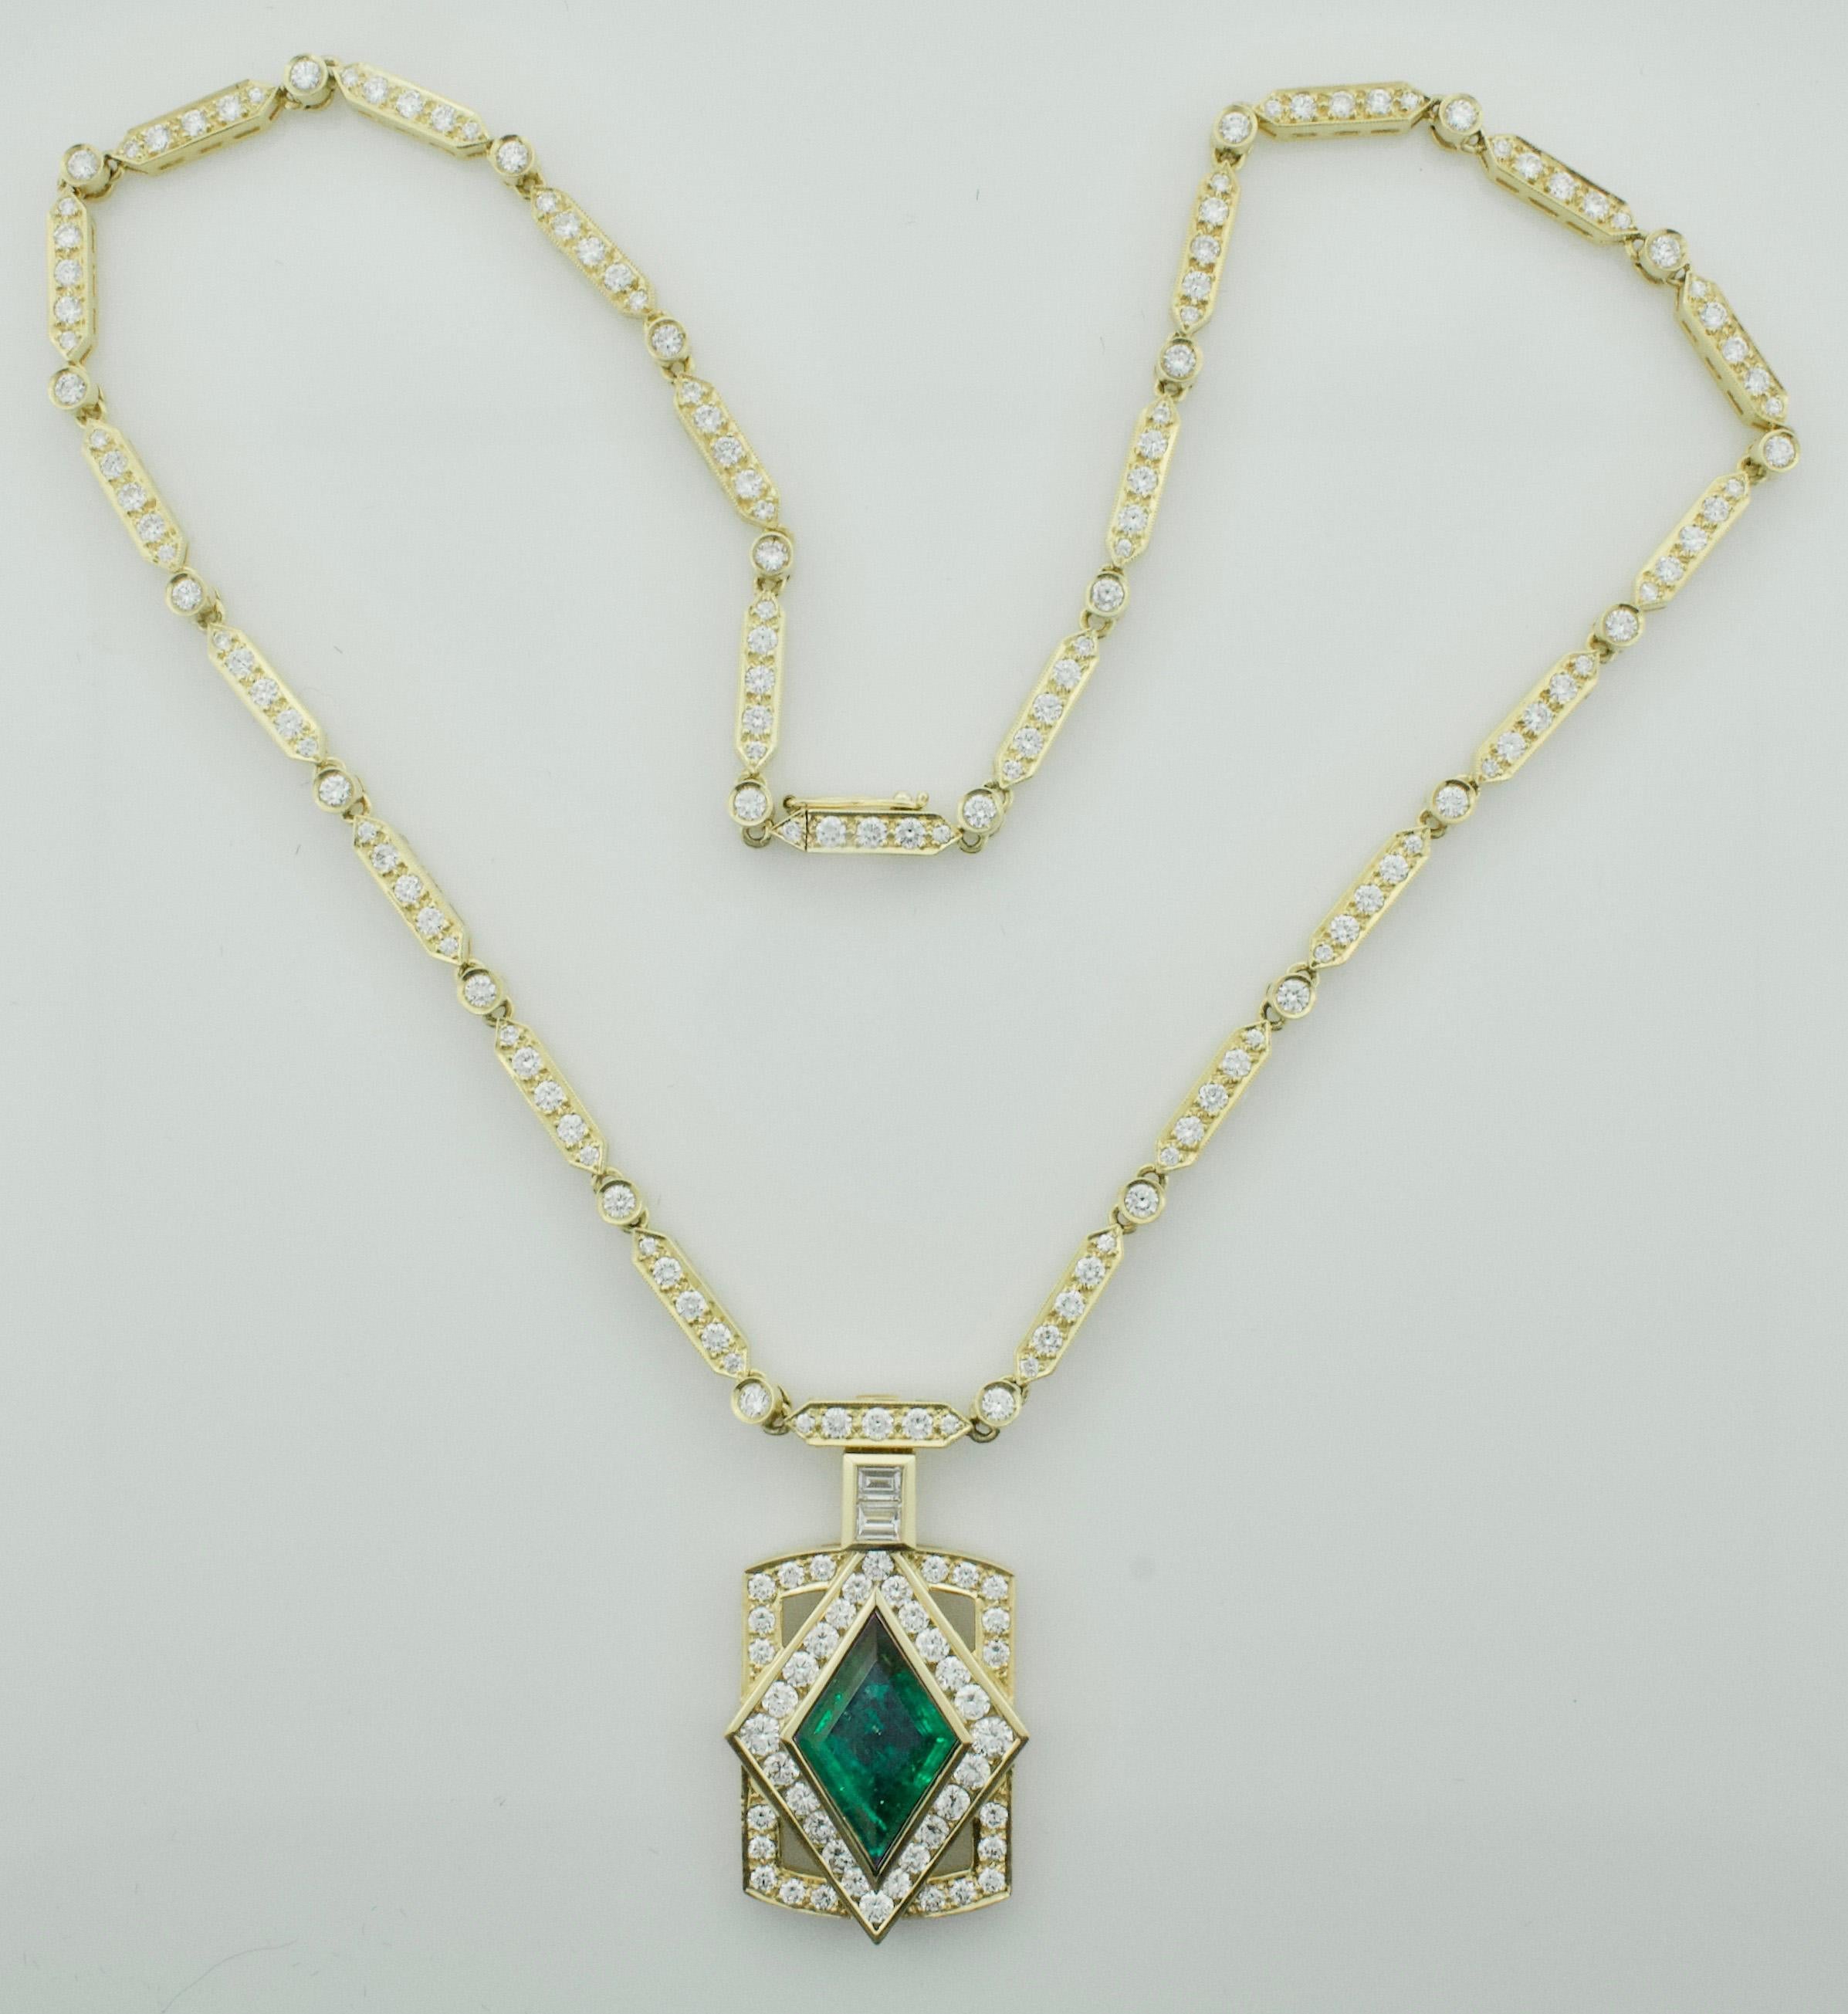 Breathtaking Emerald and Diamond Necklace in 18k 3.75 Diamond Shaped Emerald
One Diamond Shaped Emerald weighing 3.75 carats
Two Baguette Cut Diamonds weighing .30 carats [GH - VVS-VS1]
Eighty Eight Round Brilliant Cut Diamonds weighing 5.50 carats 